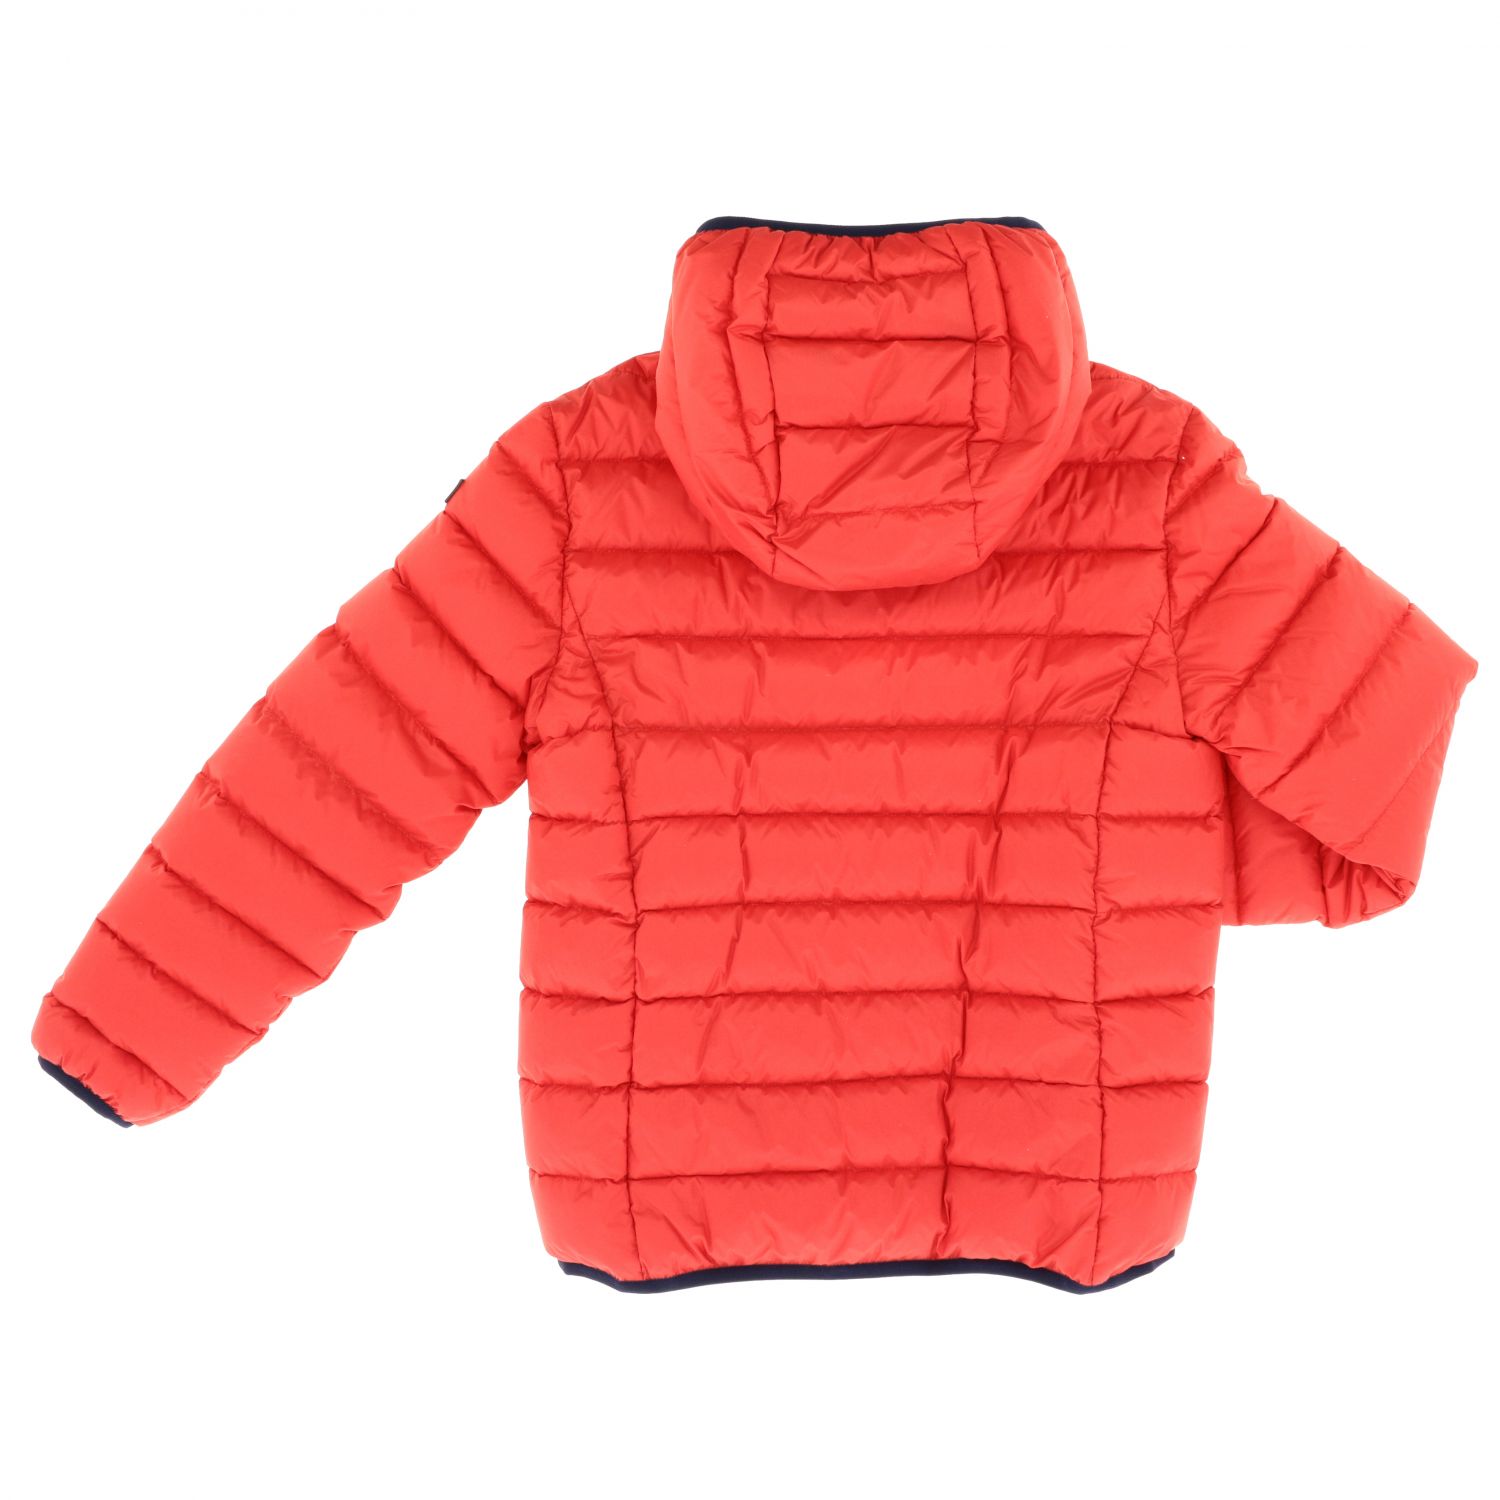 Fay Outlet: jacket for boys - Red | Fay jacket NBI32397010 RME online ...